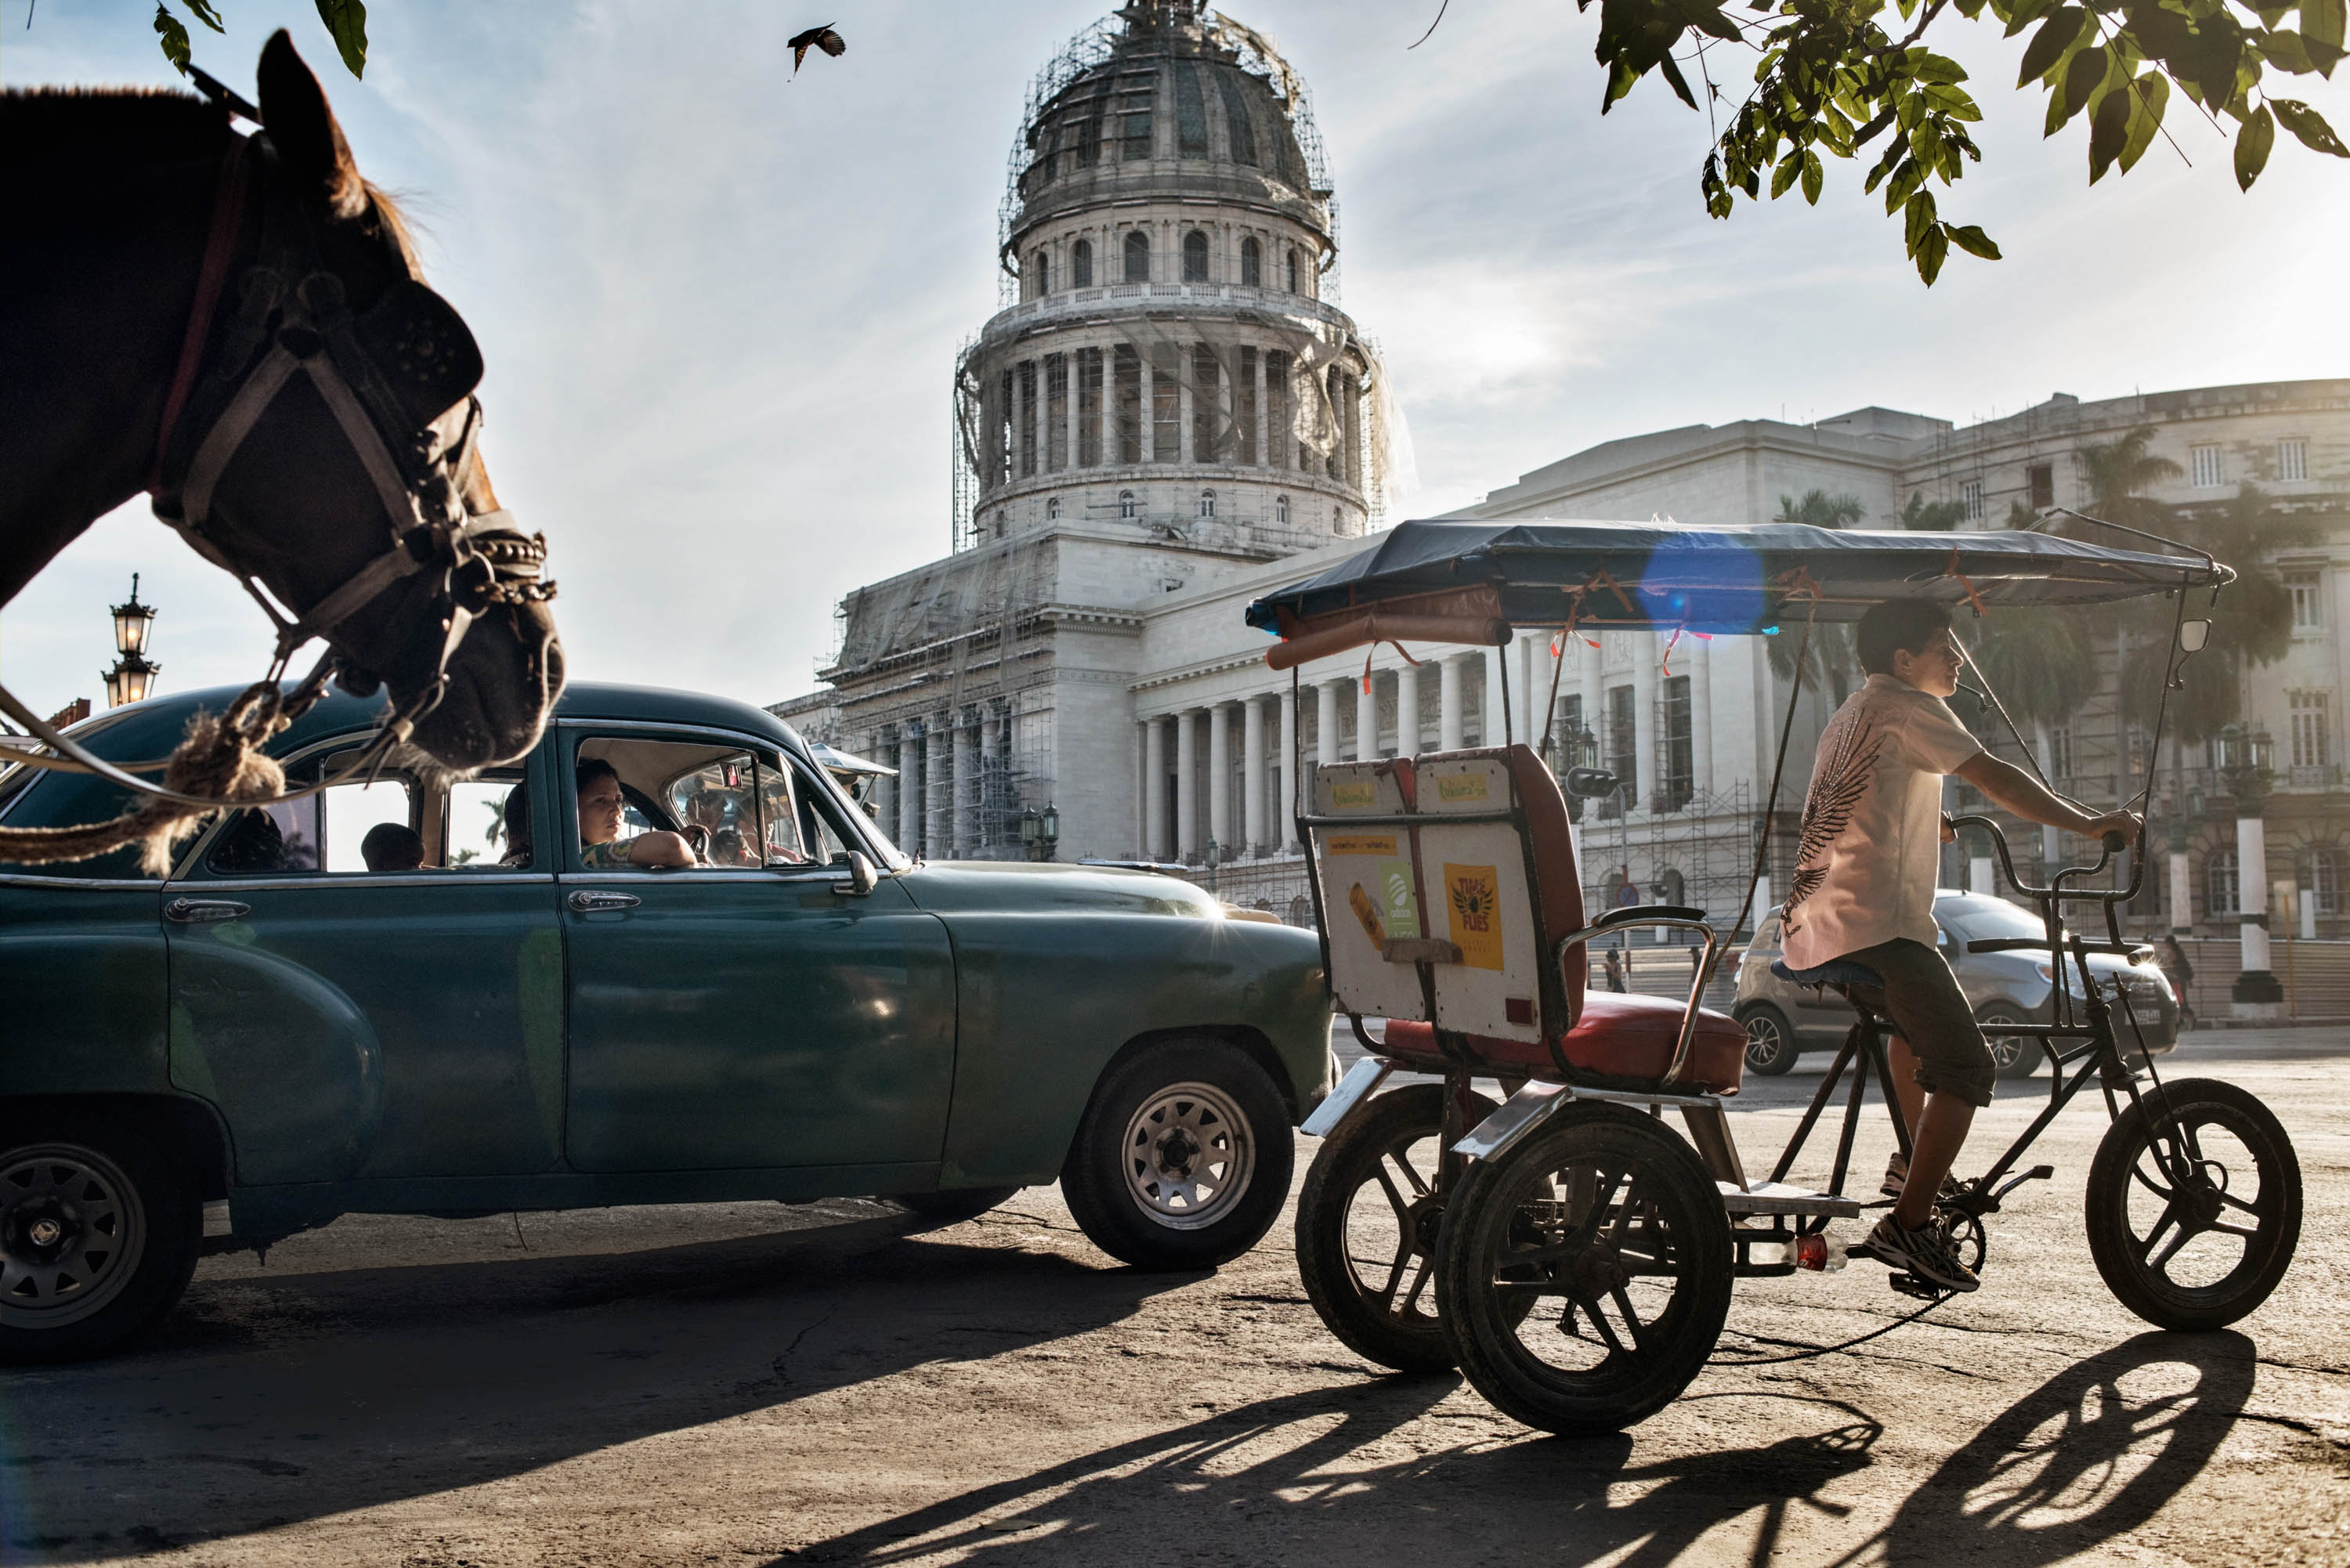 Havana is divided between new and old by the stately boulevard that runs past El Capitolio, inspired by the U.S. Capitol building. (Yuri Kozyrev—NOOR for TIME)